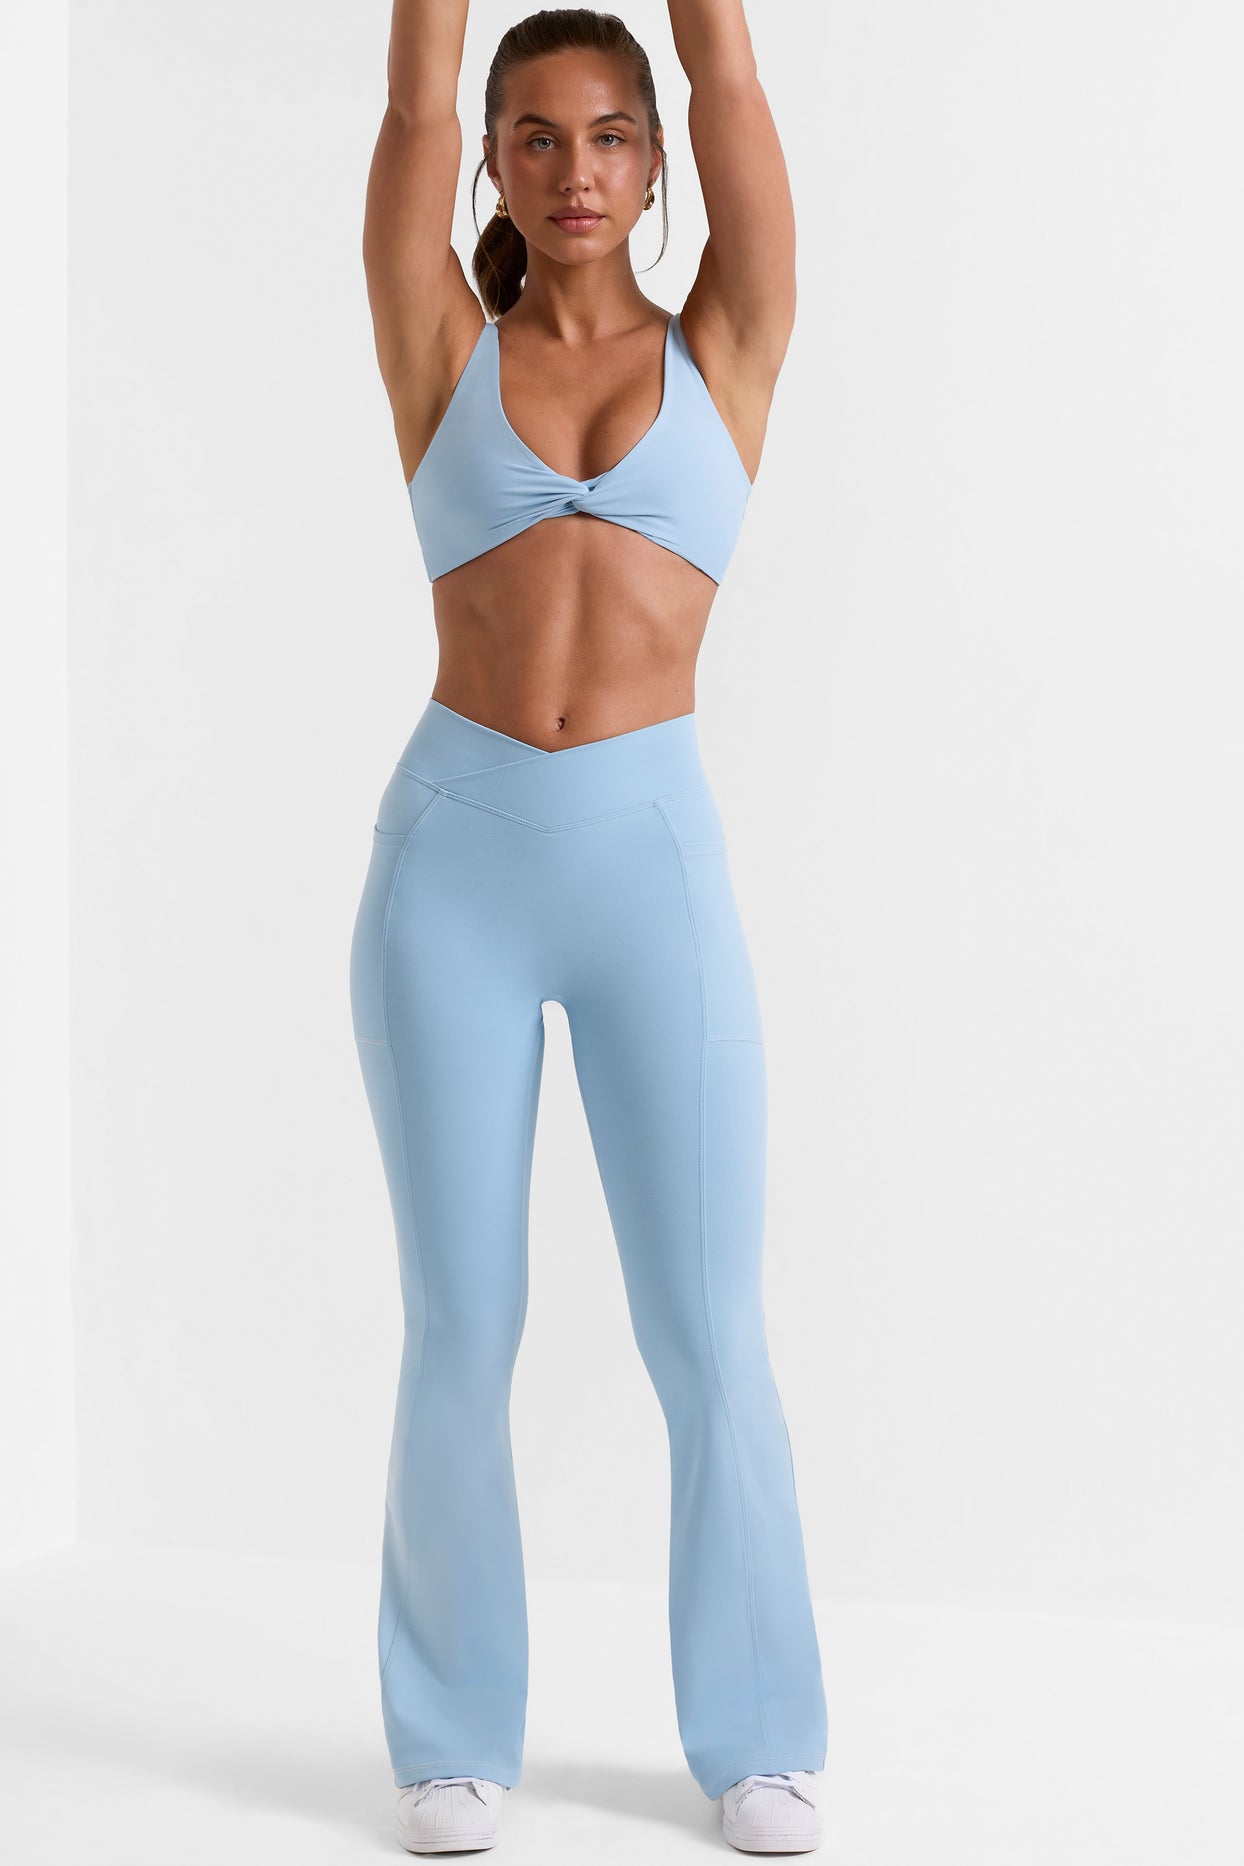 Try To Catch Up Light Blue Leggings